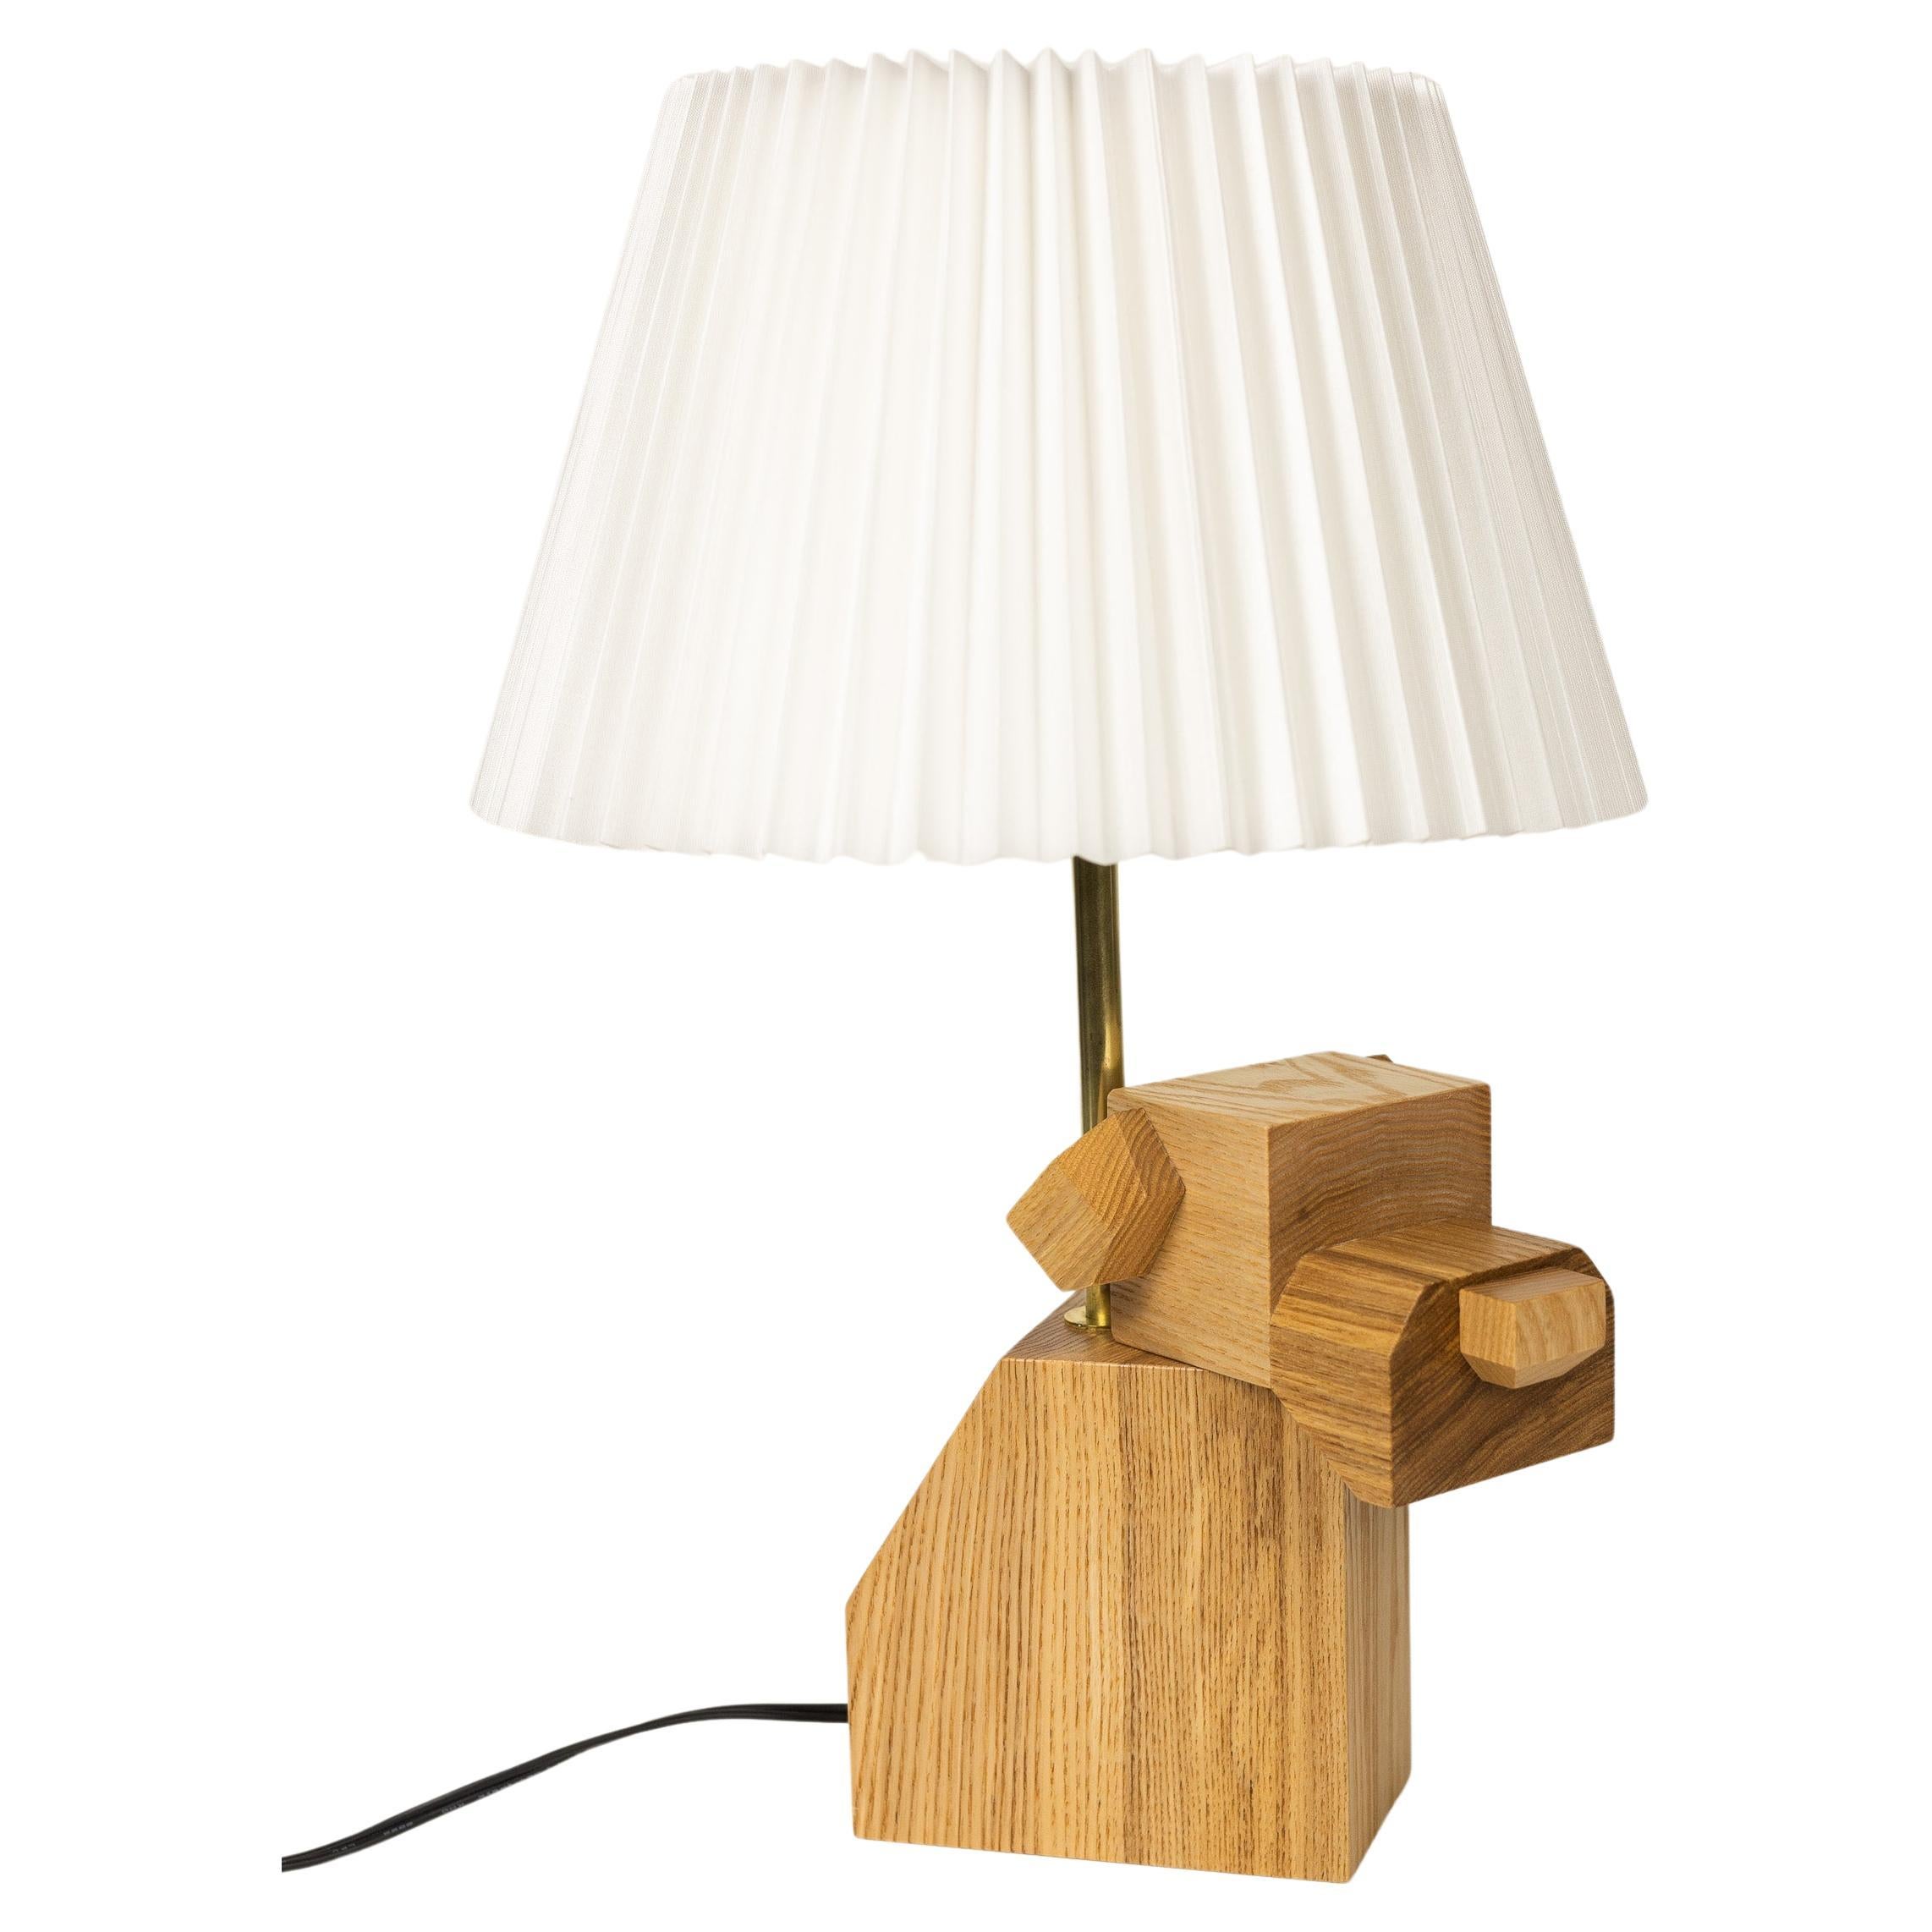 Wood DOGGY Table Lamp with White Fabric Shade, hand-crafted, hardwood For Sale